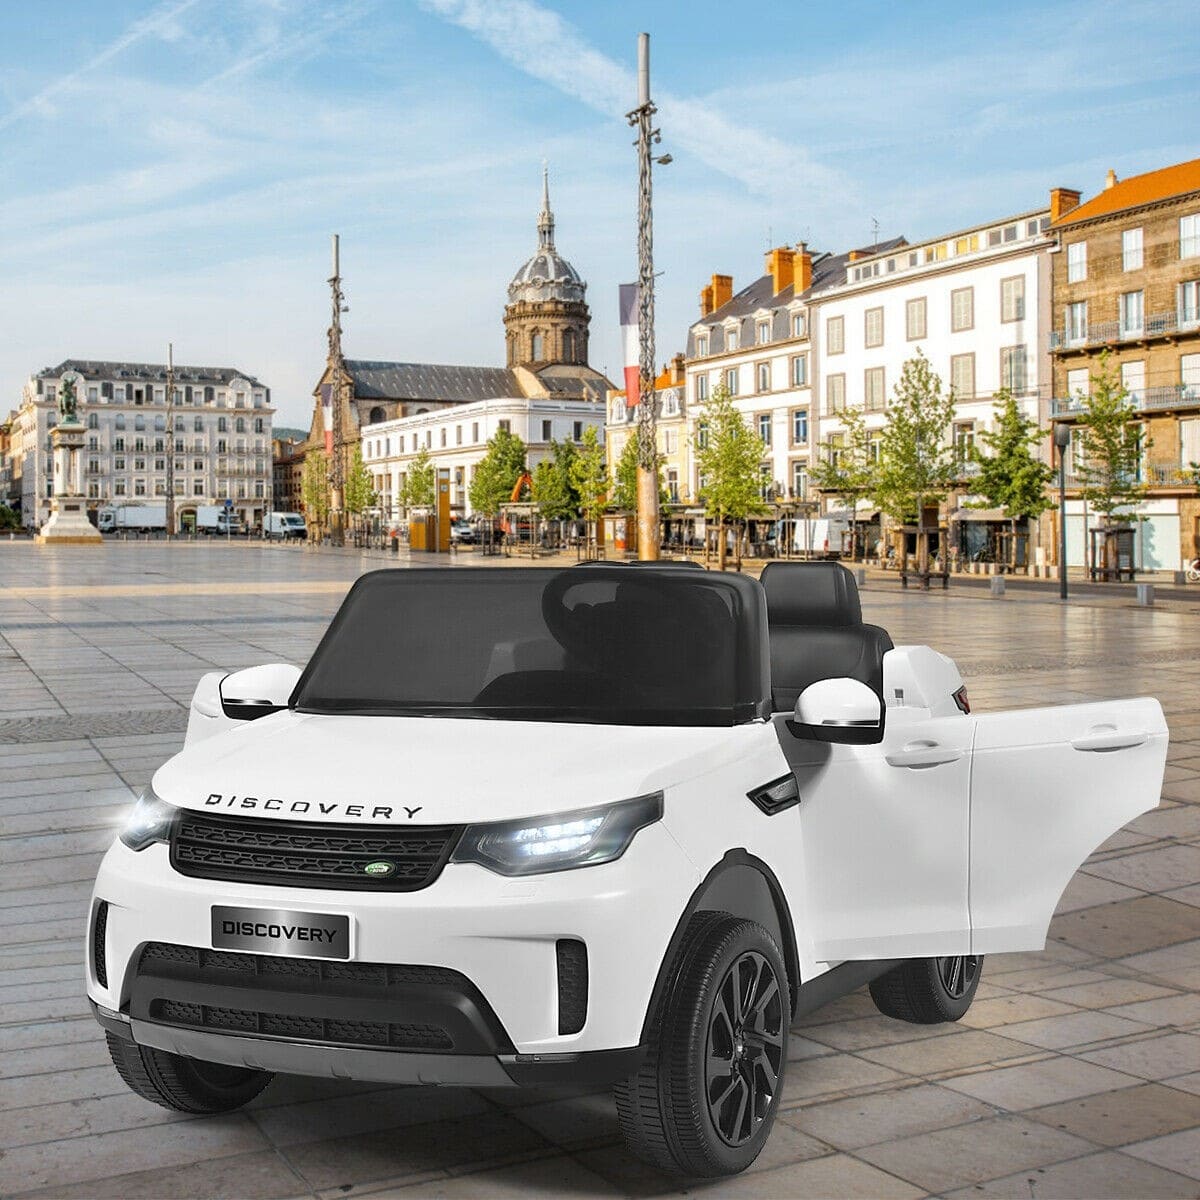 land rover discovery ride on car